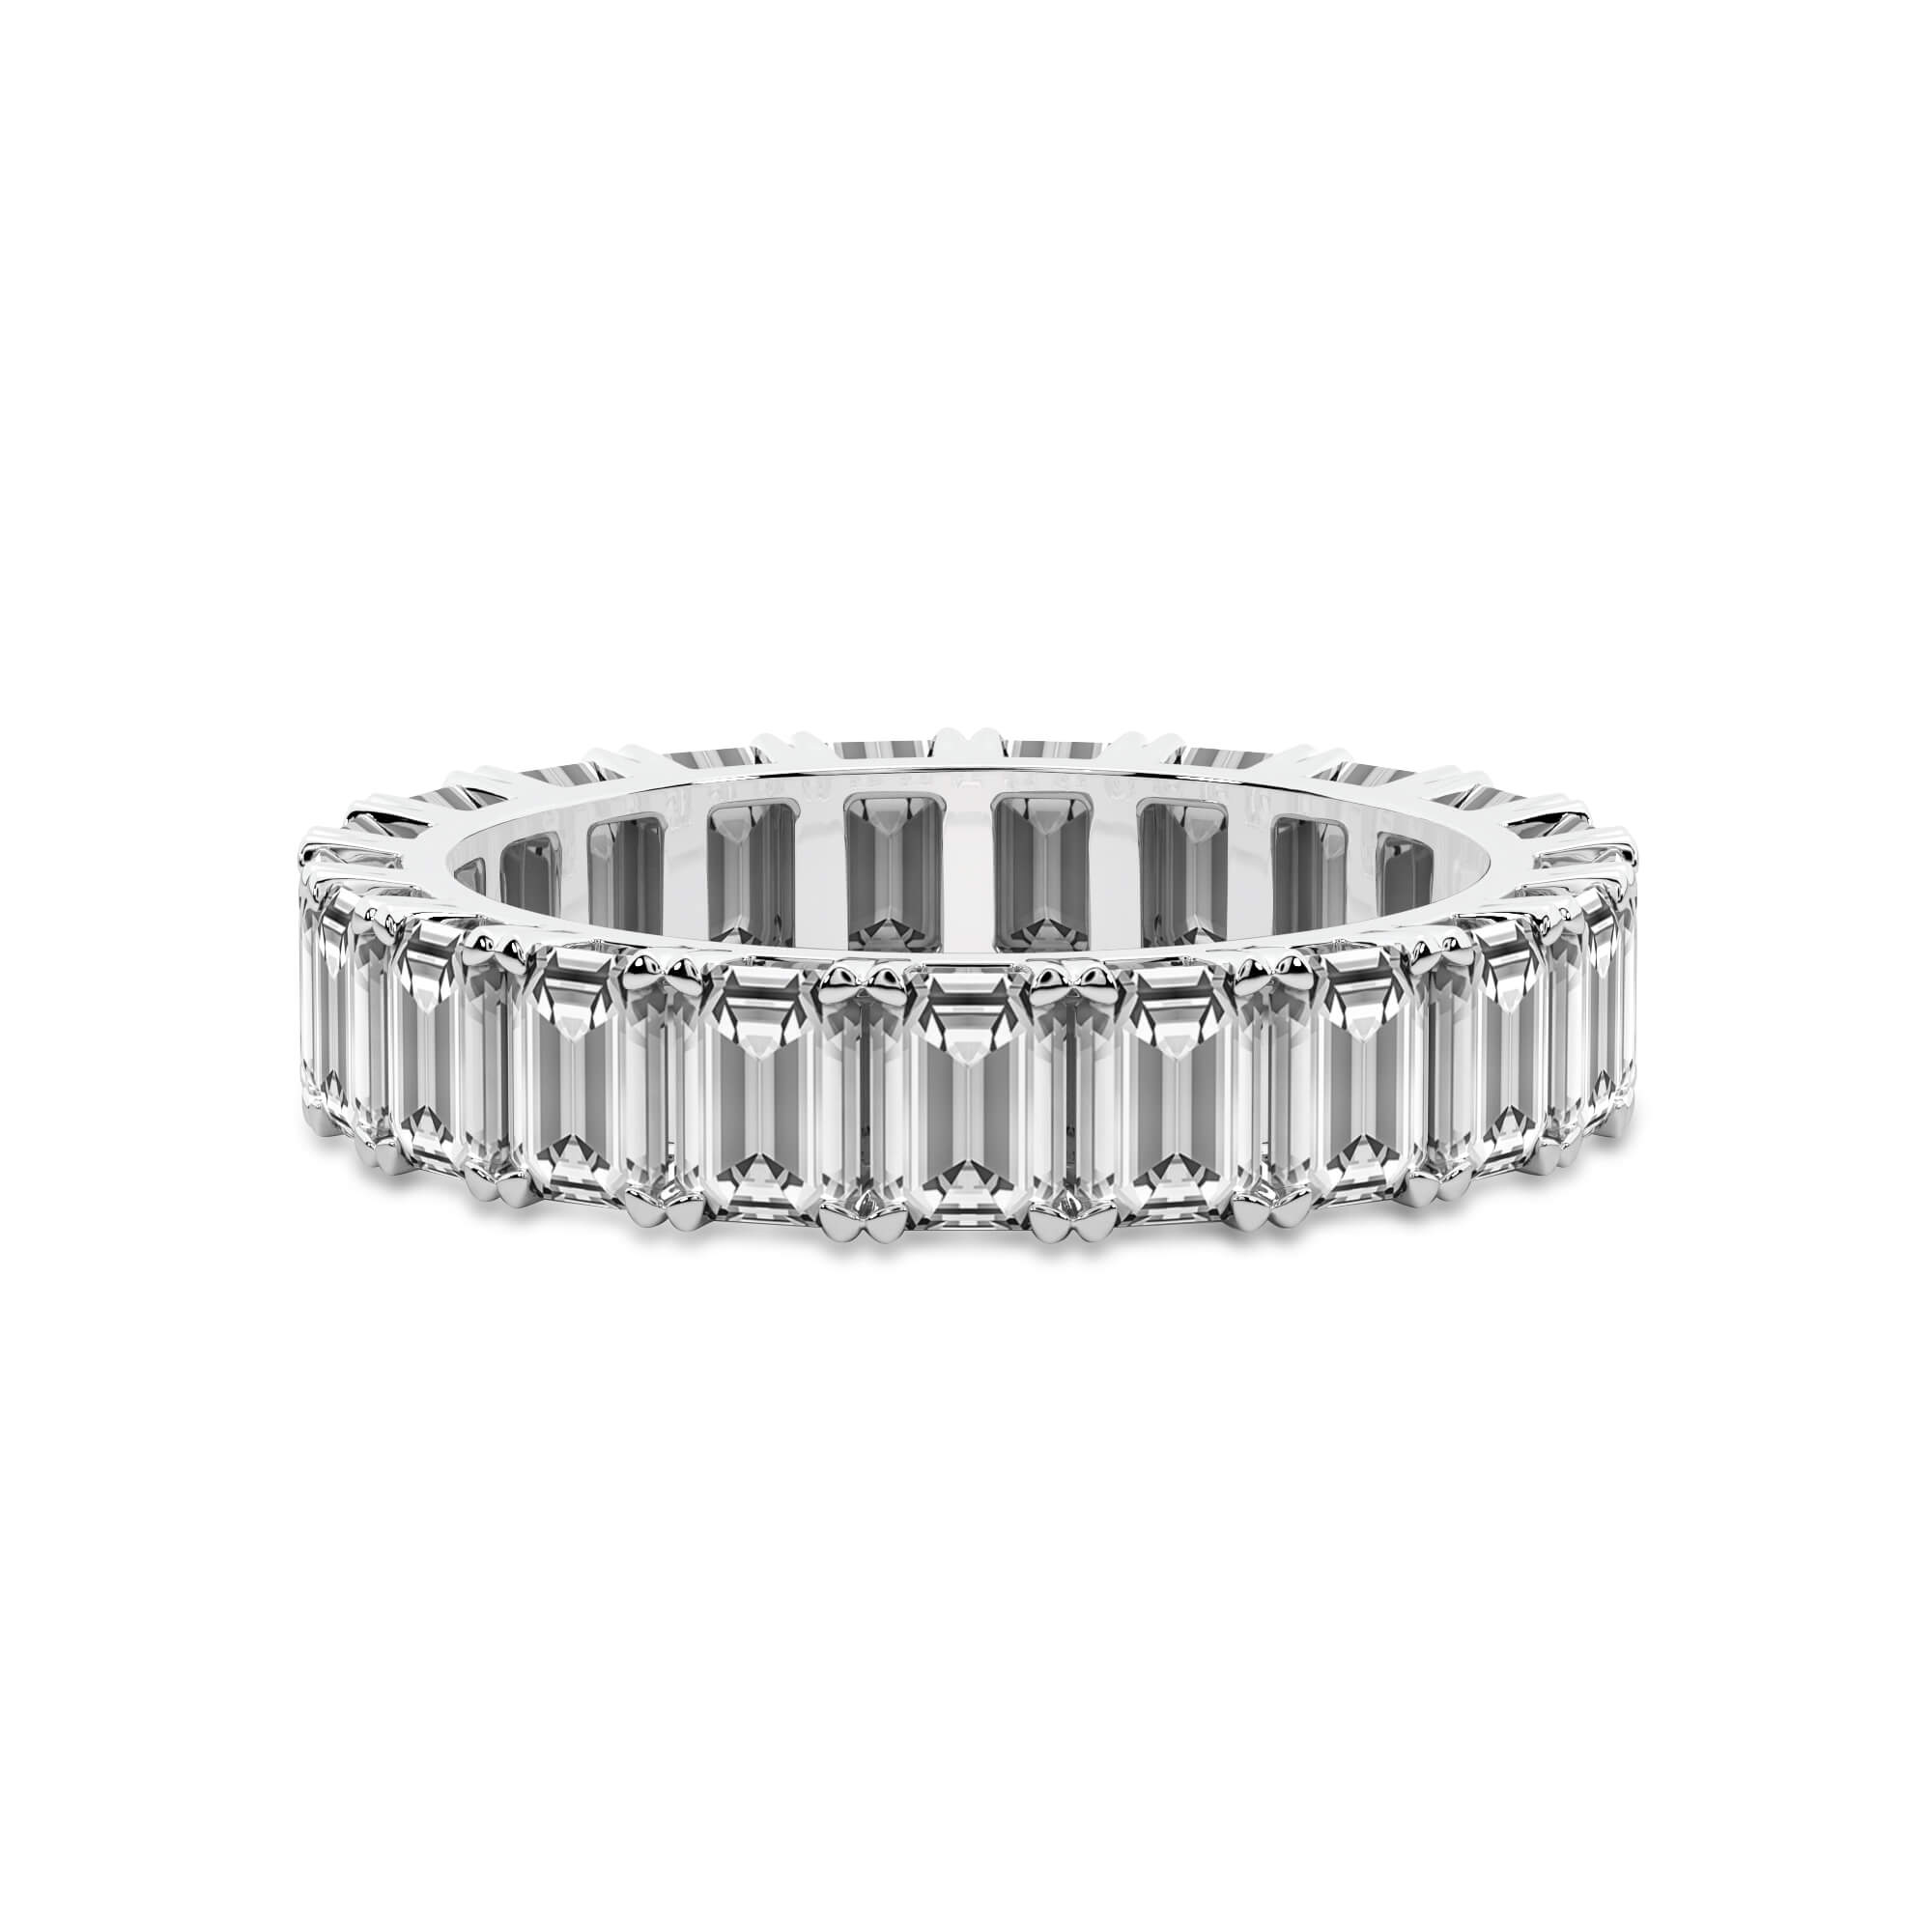 Riley Emerald Lab Diamond Eternity Ring front view